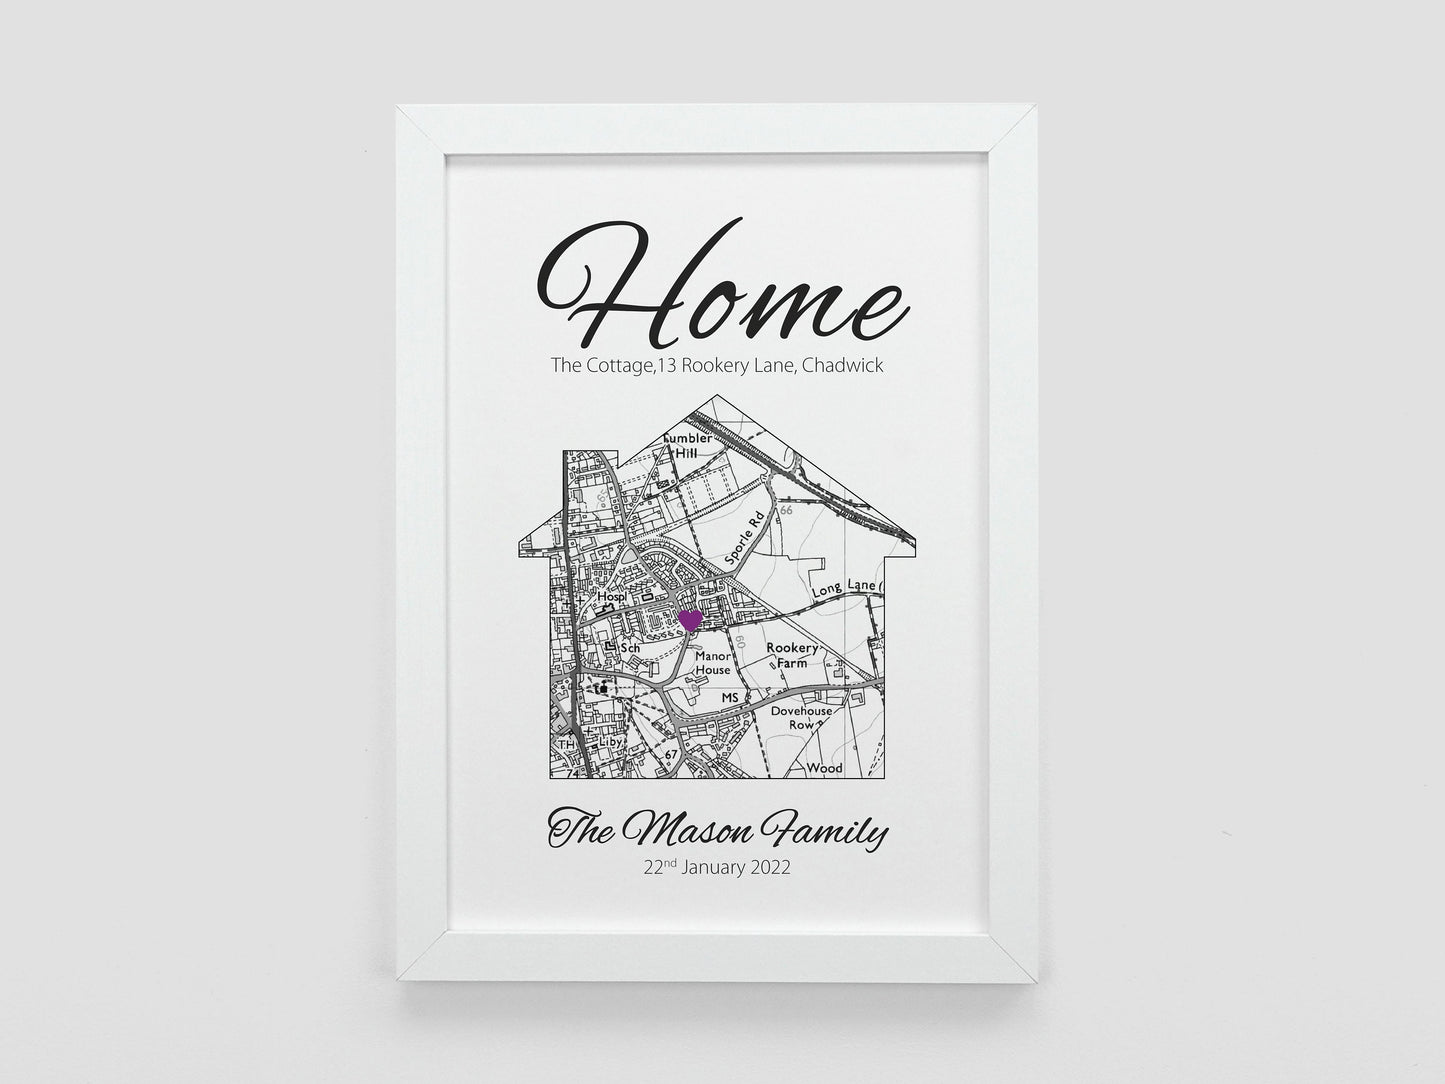 House warming gift | Personalised map new home gift | Personalized couples gifts | House moving present | First home housewarming gift VA007